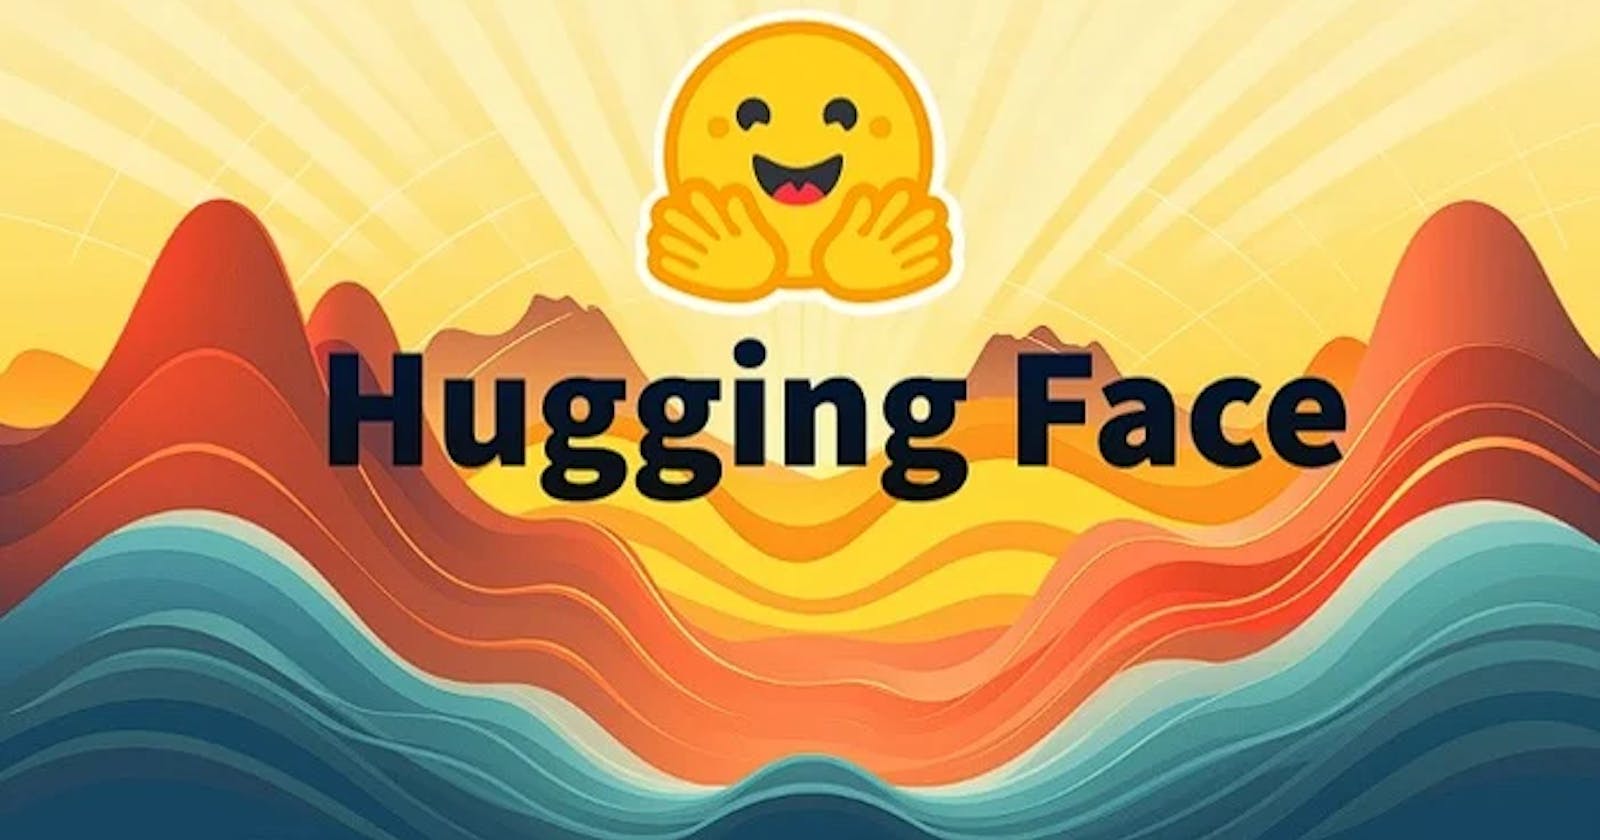 Beginners project : Make a Node JS Command Line Application to convert text to speech using hugging face inference API.